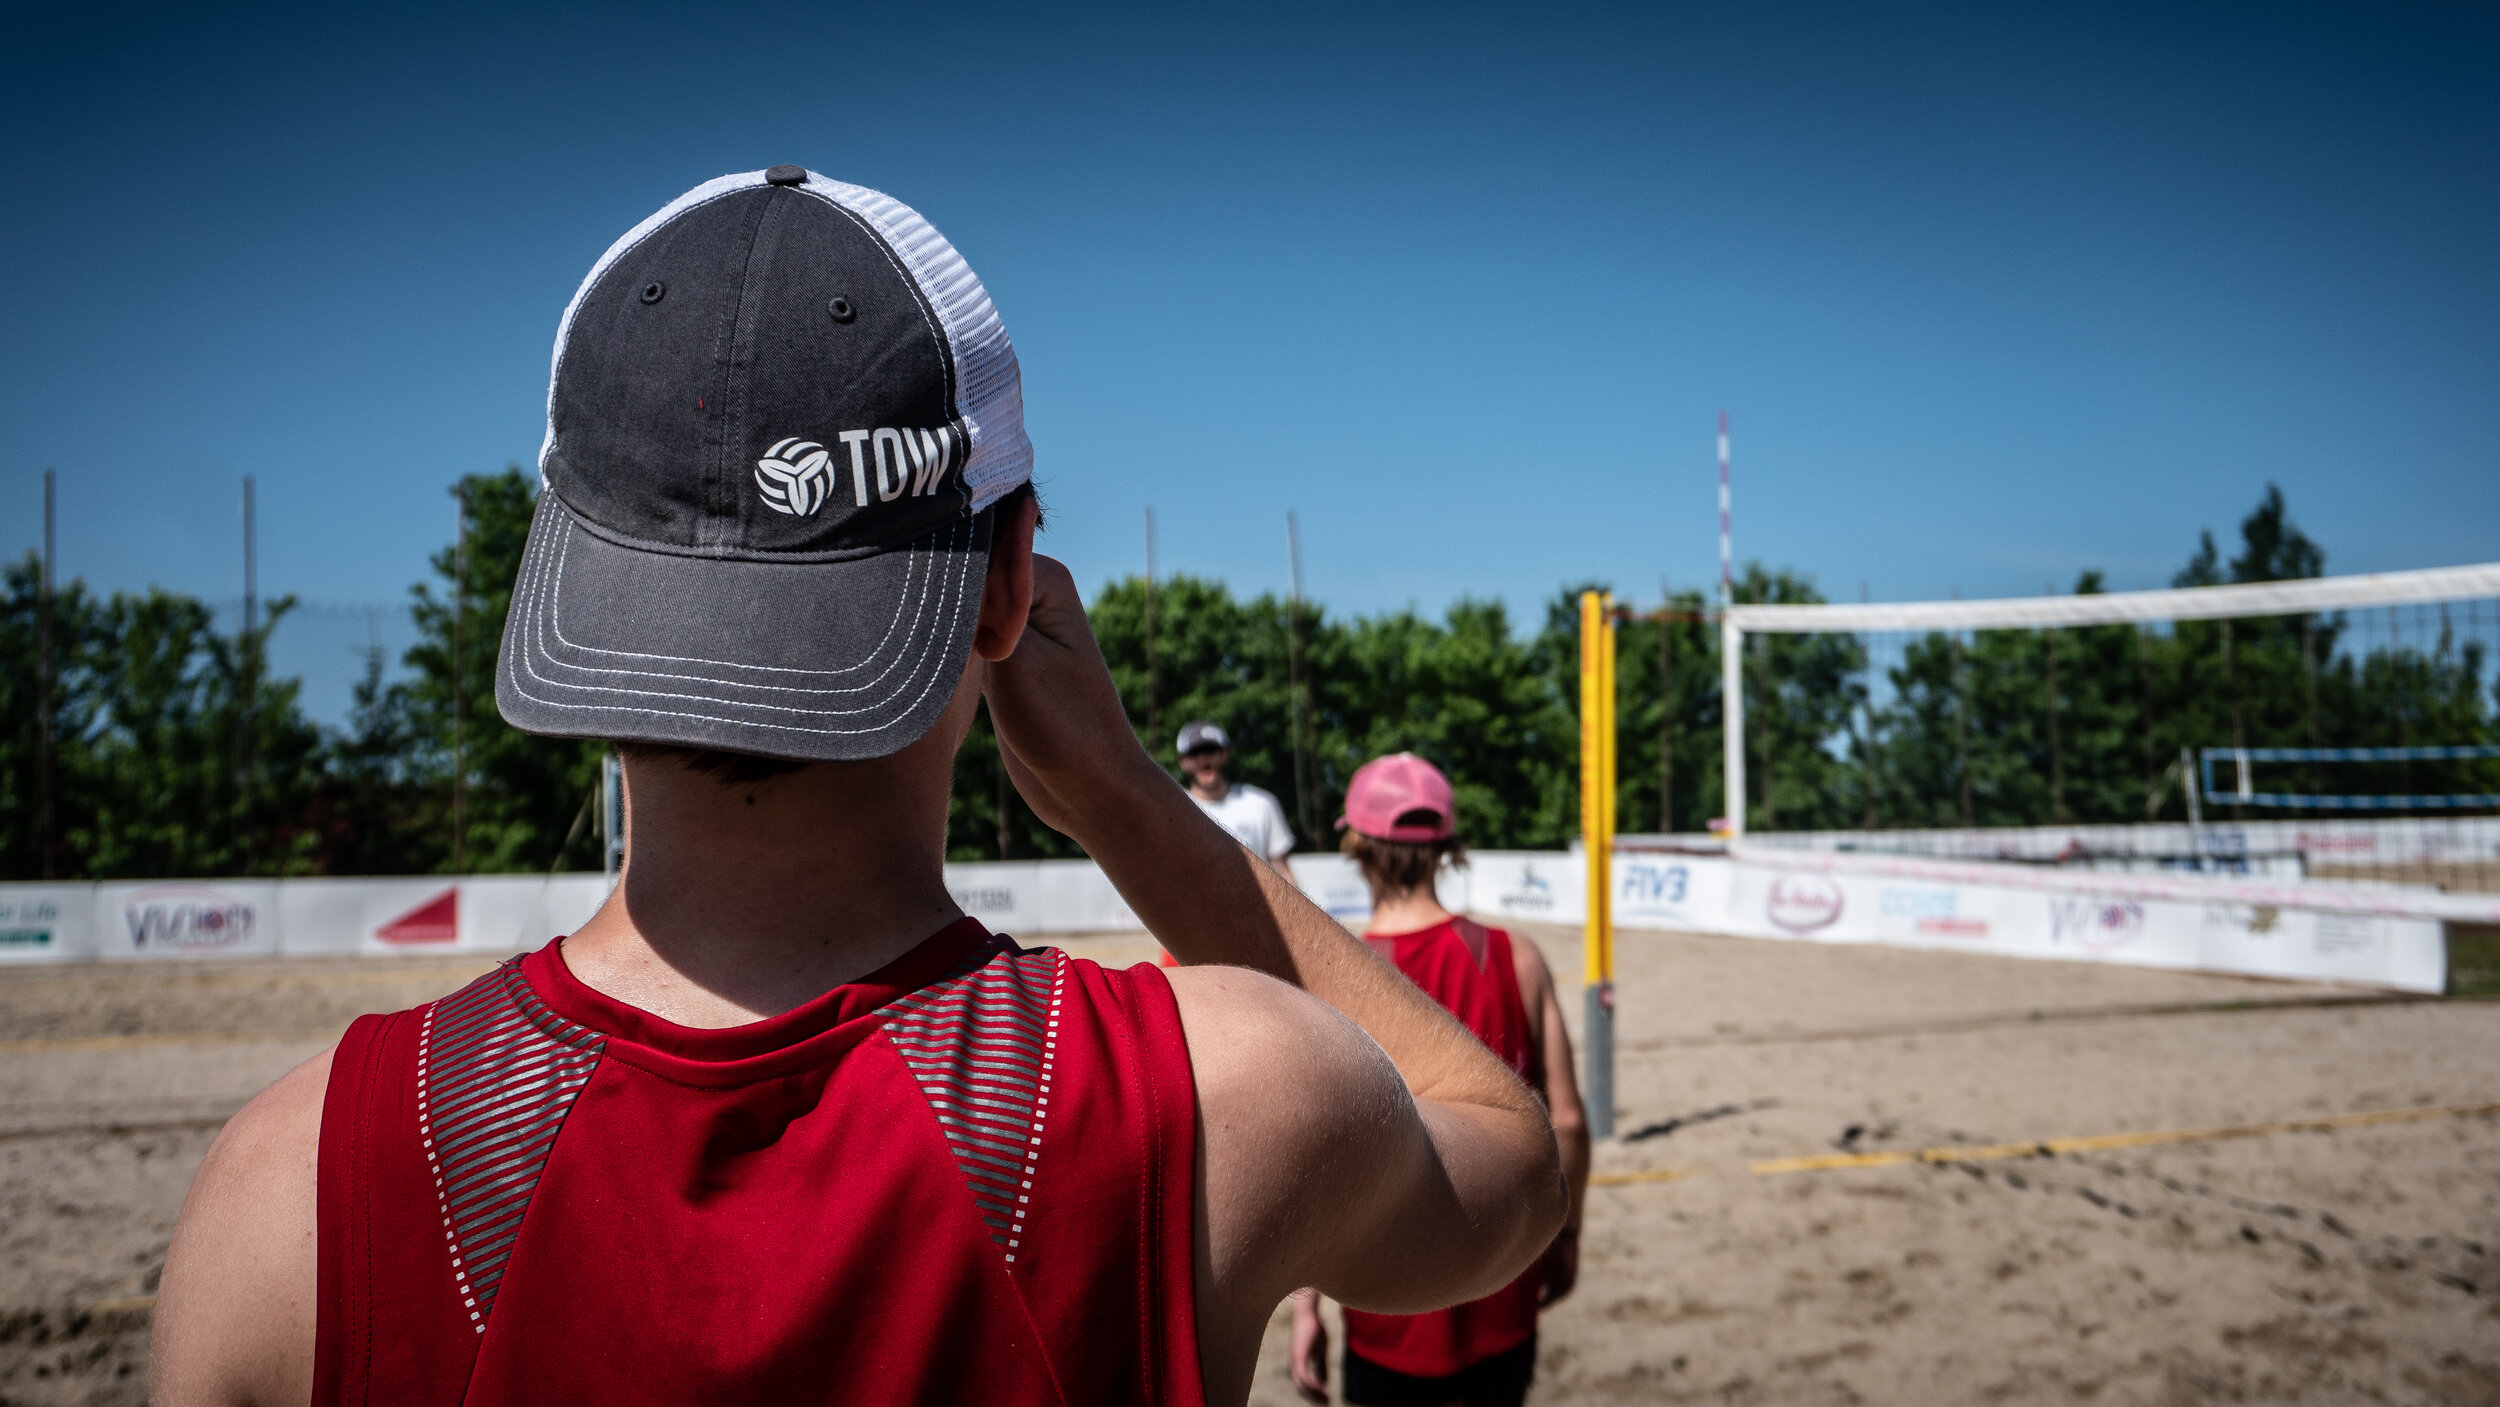 Team O Camps_TOW_July 12 2019_9.jpg